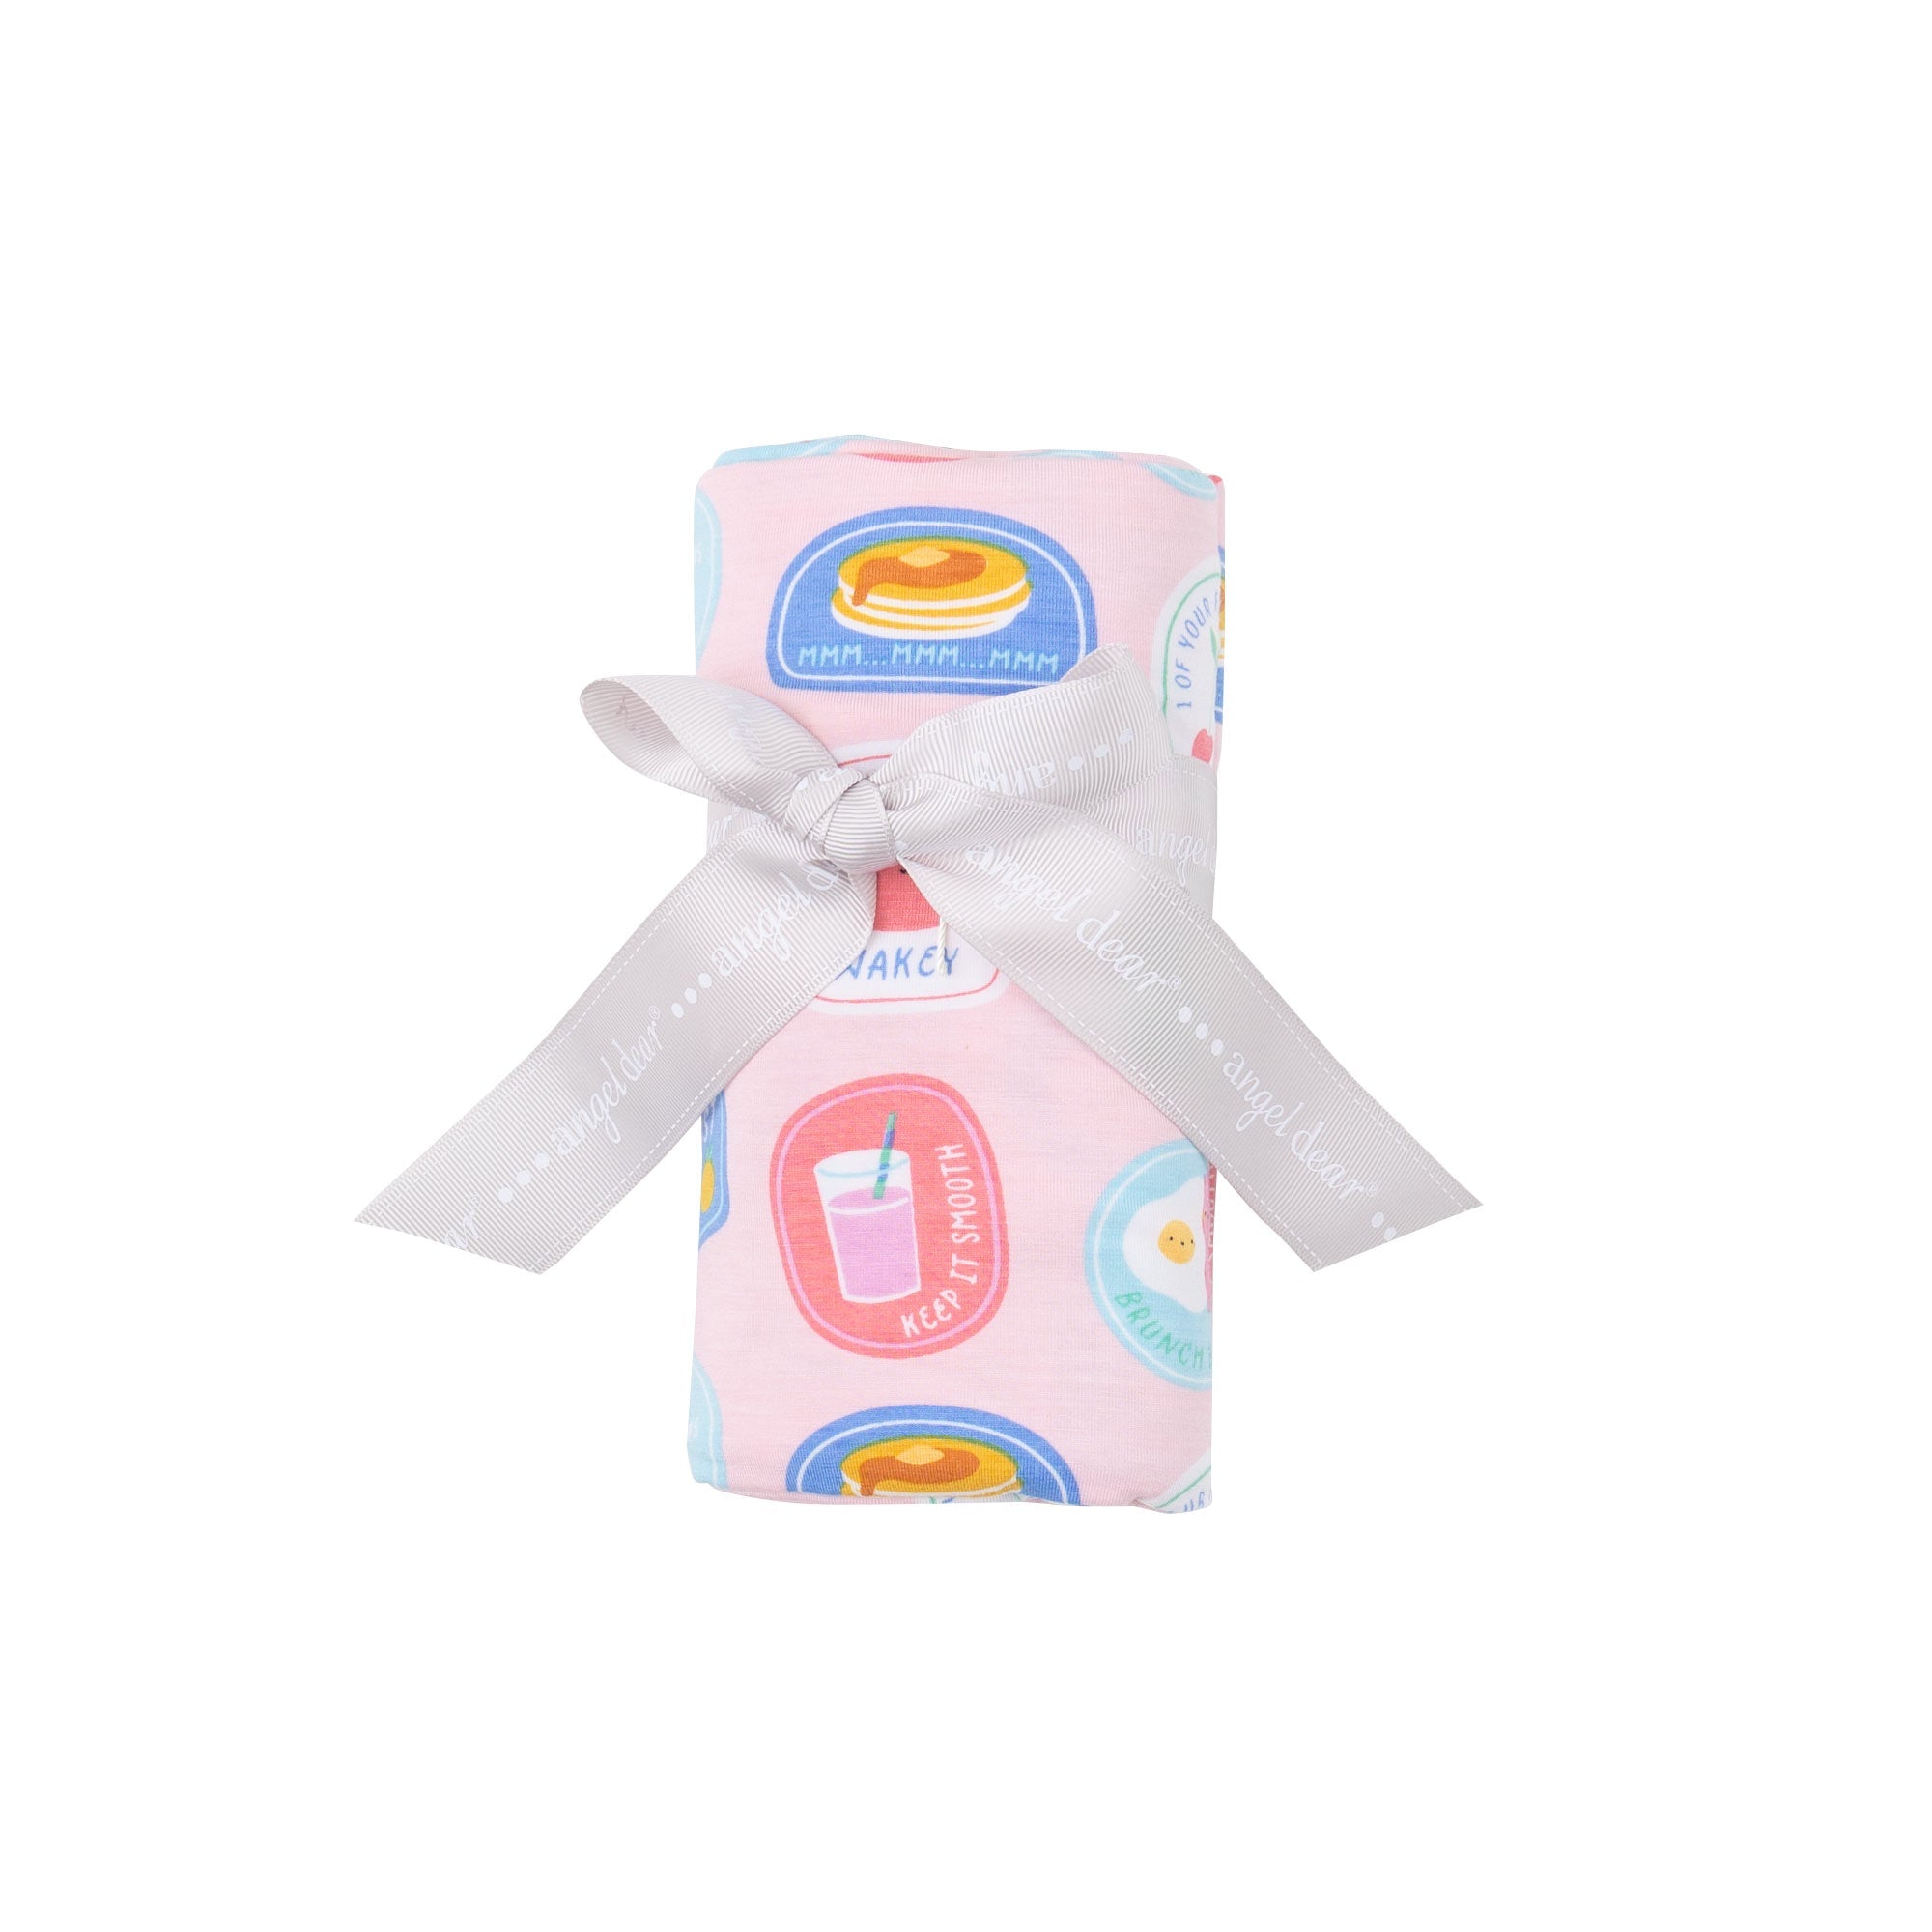 Swaddle Blanket - Breakfast Club Patches Pink